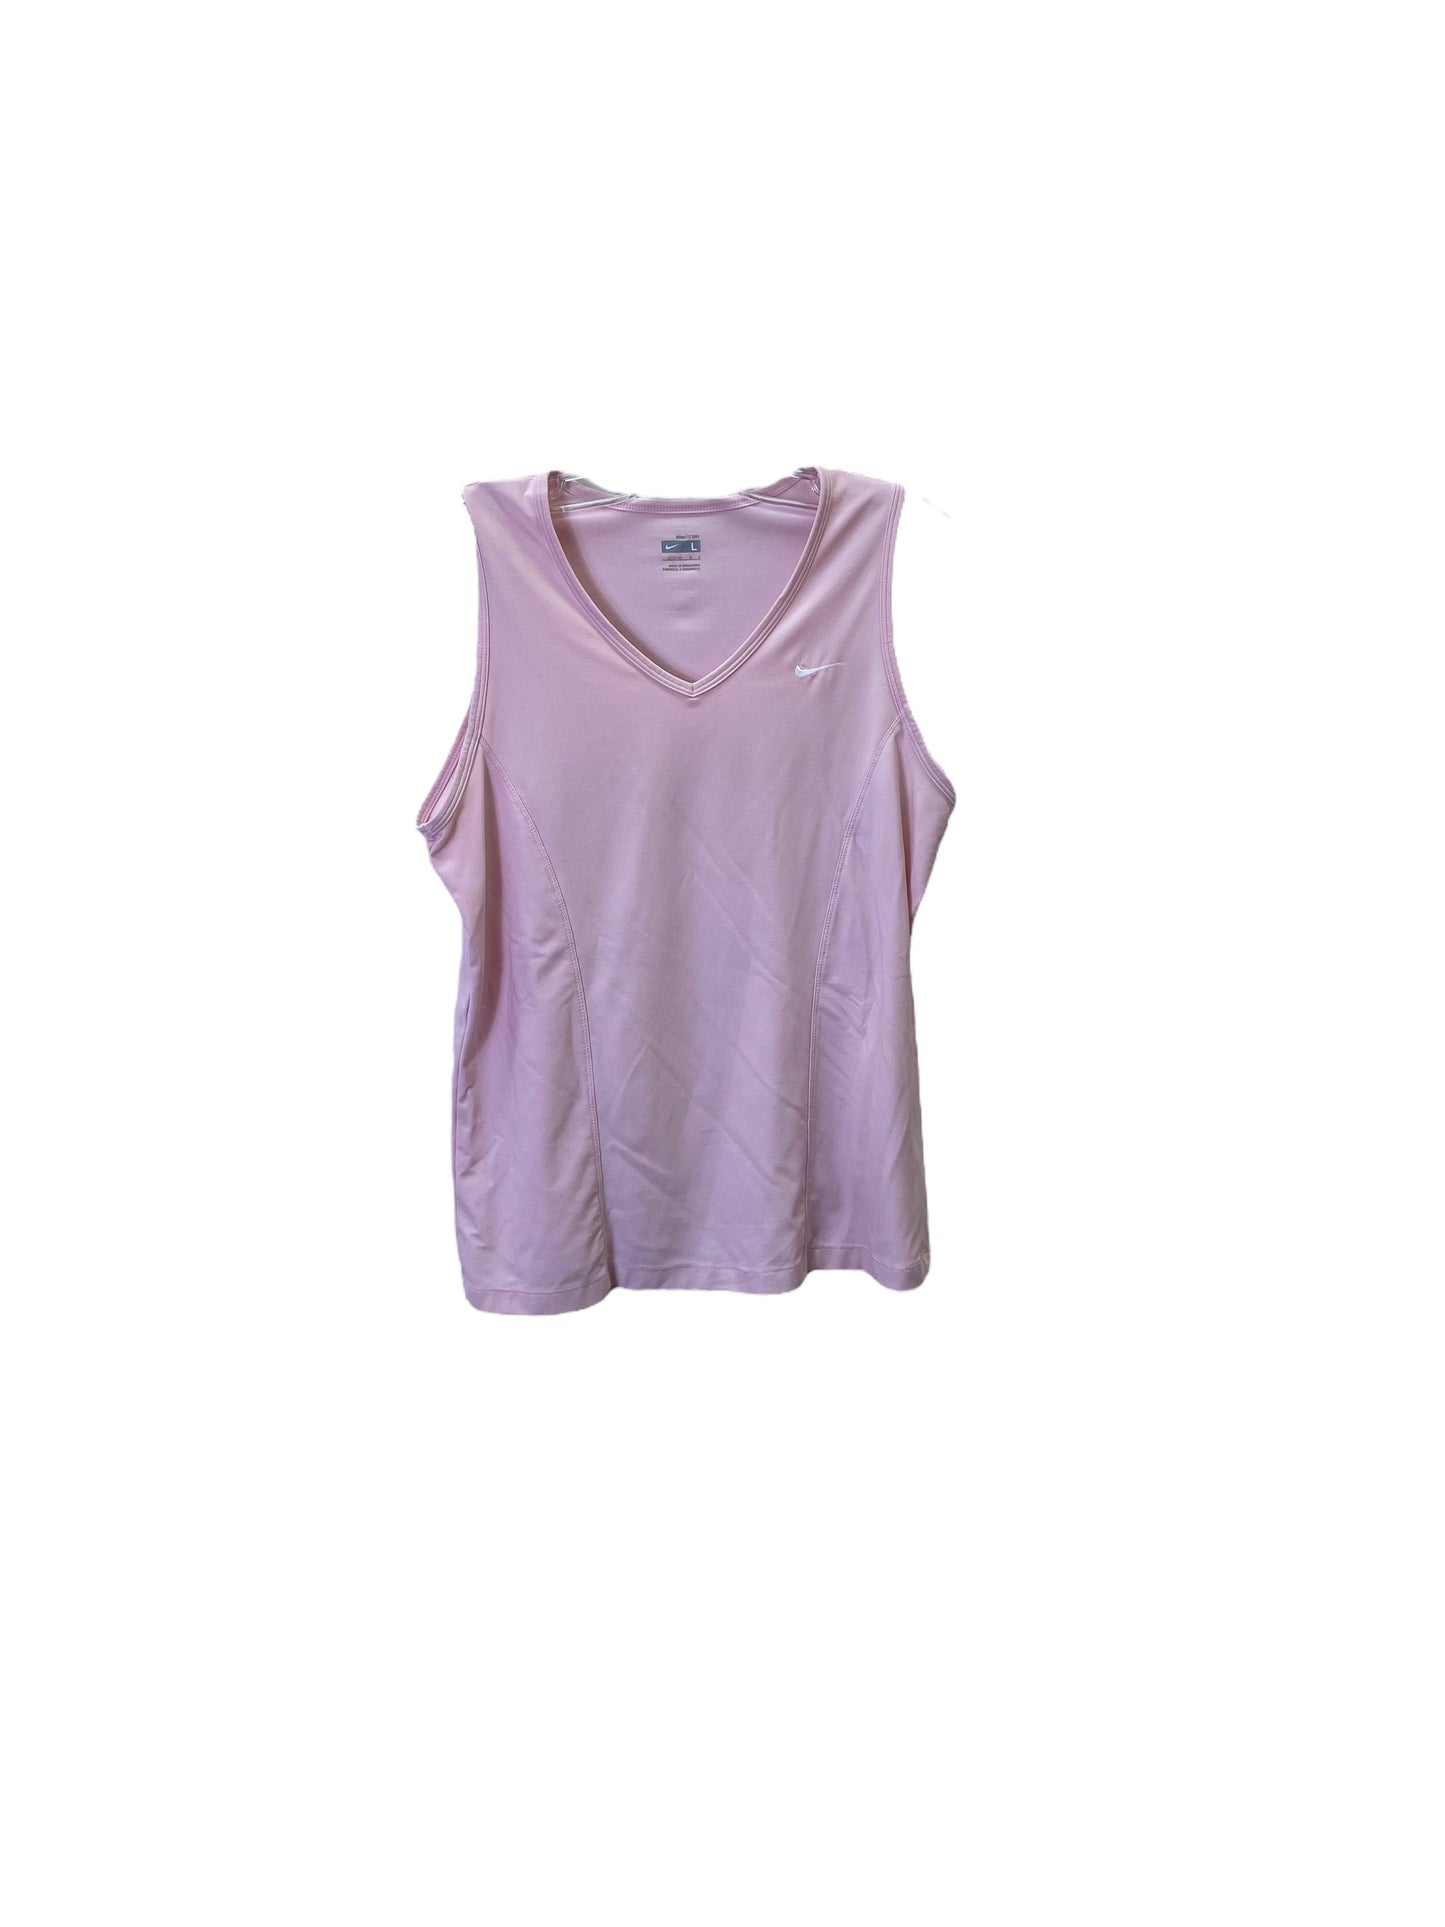 Pink Athletic Tank Top By Nike, Size: L